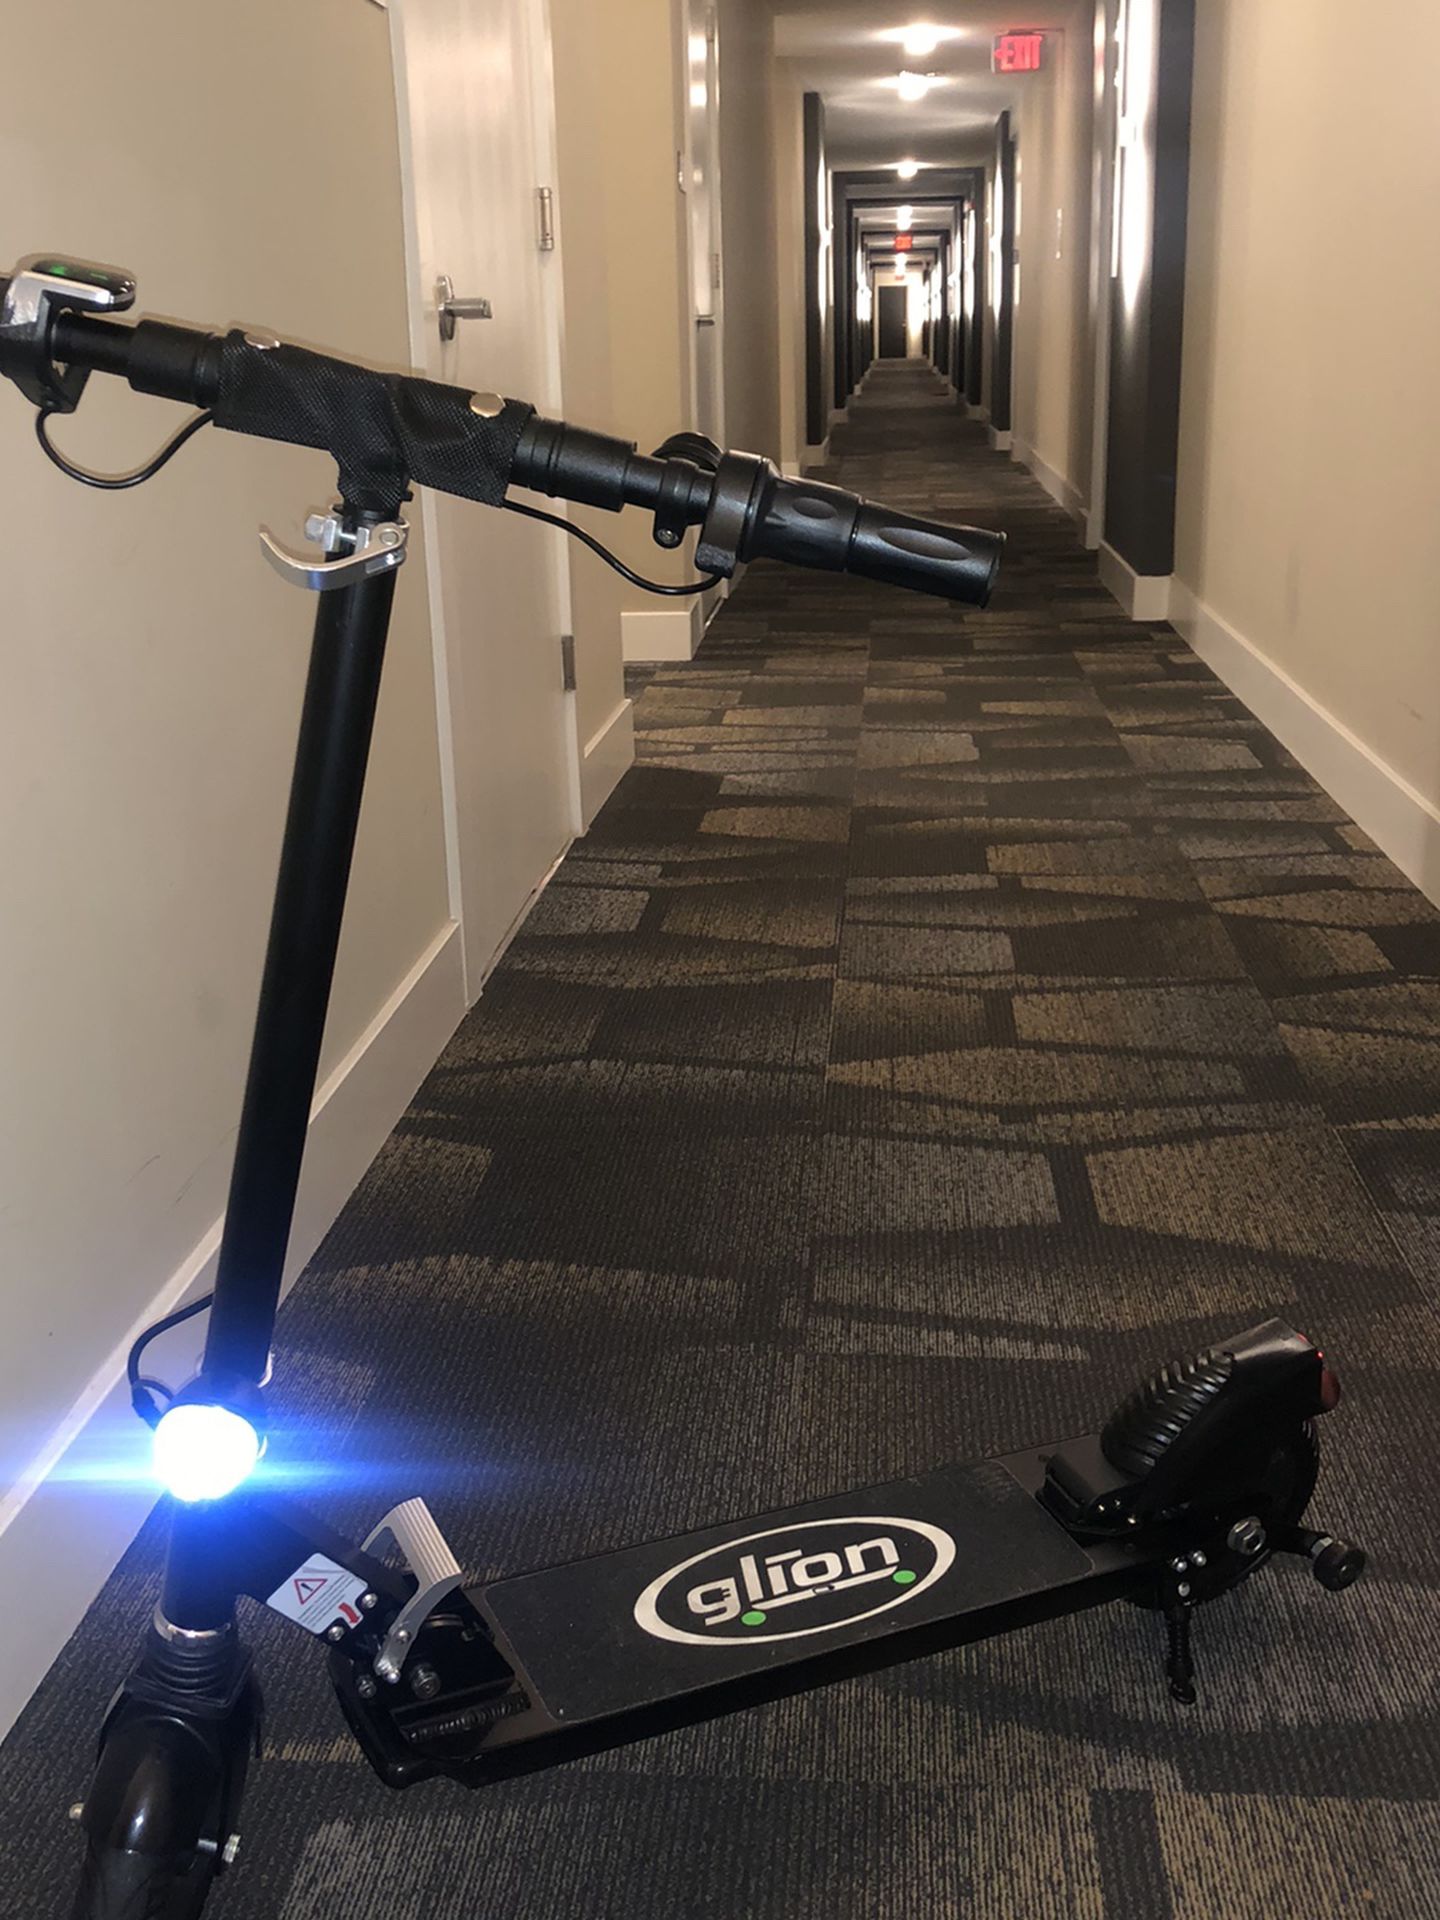 Glion Dolly Foldable Lightweight Adult Electric Scooter UL Certified